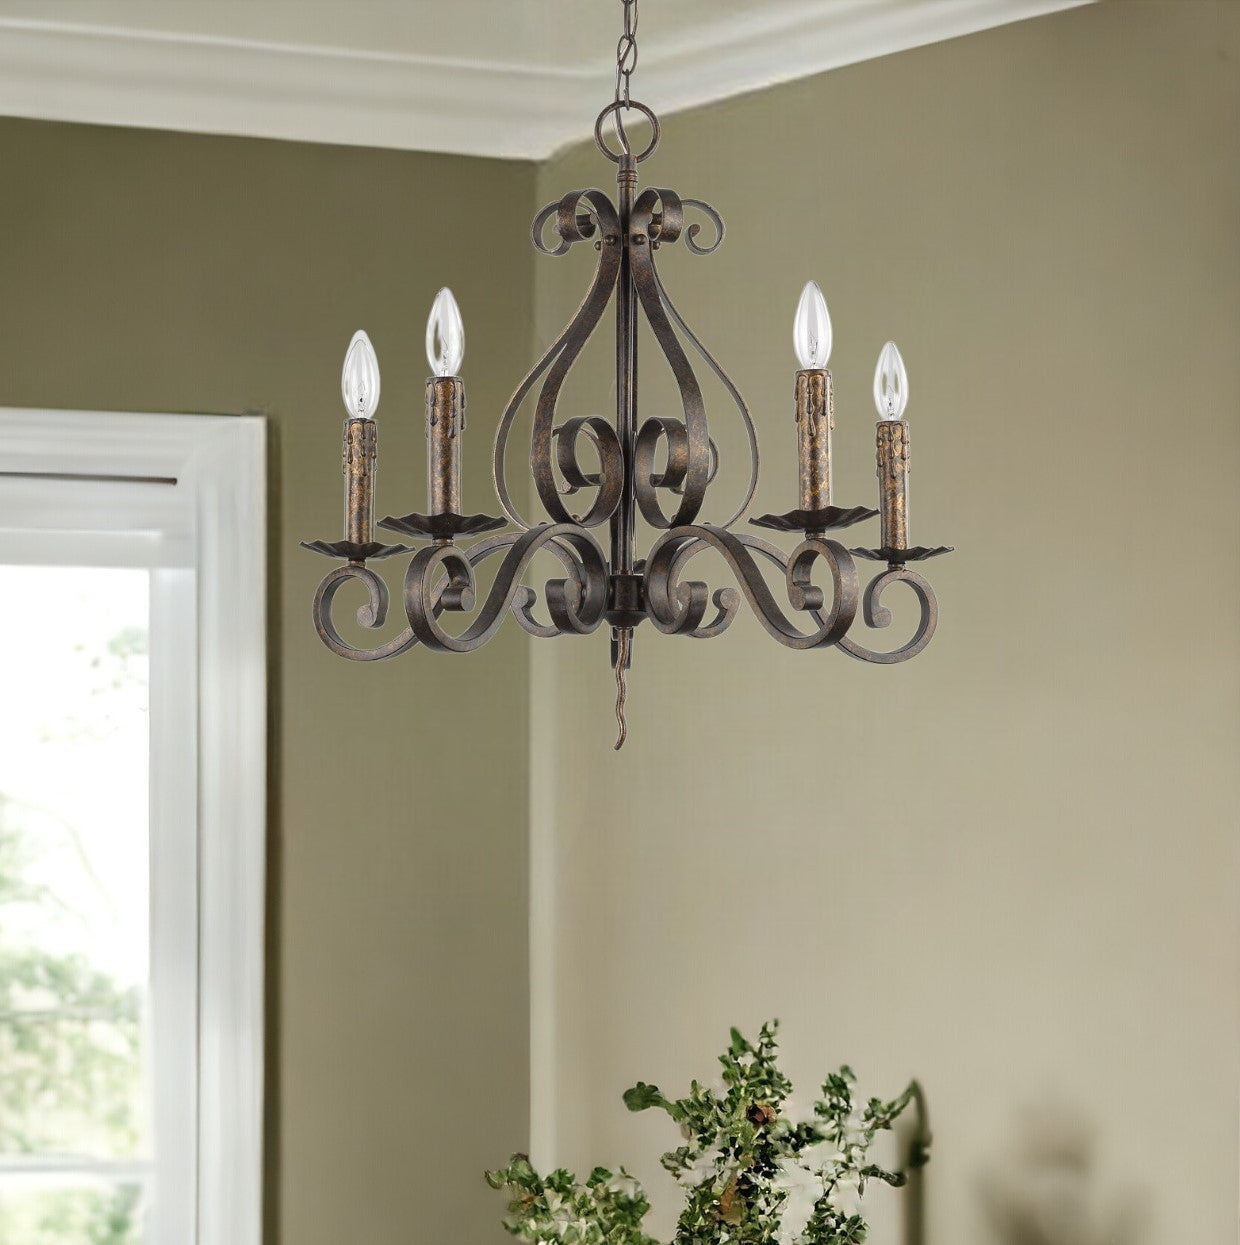 Lydia 5-Light Russet Chandelier With Melted Wax Tapers